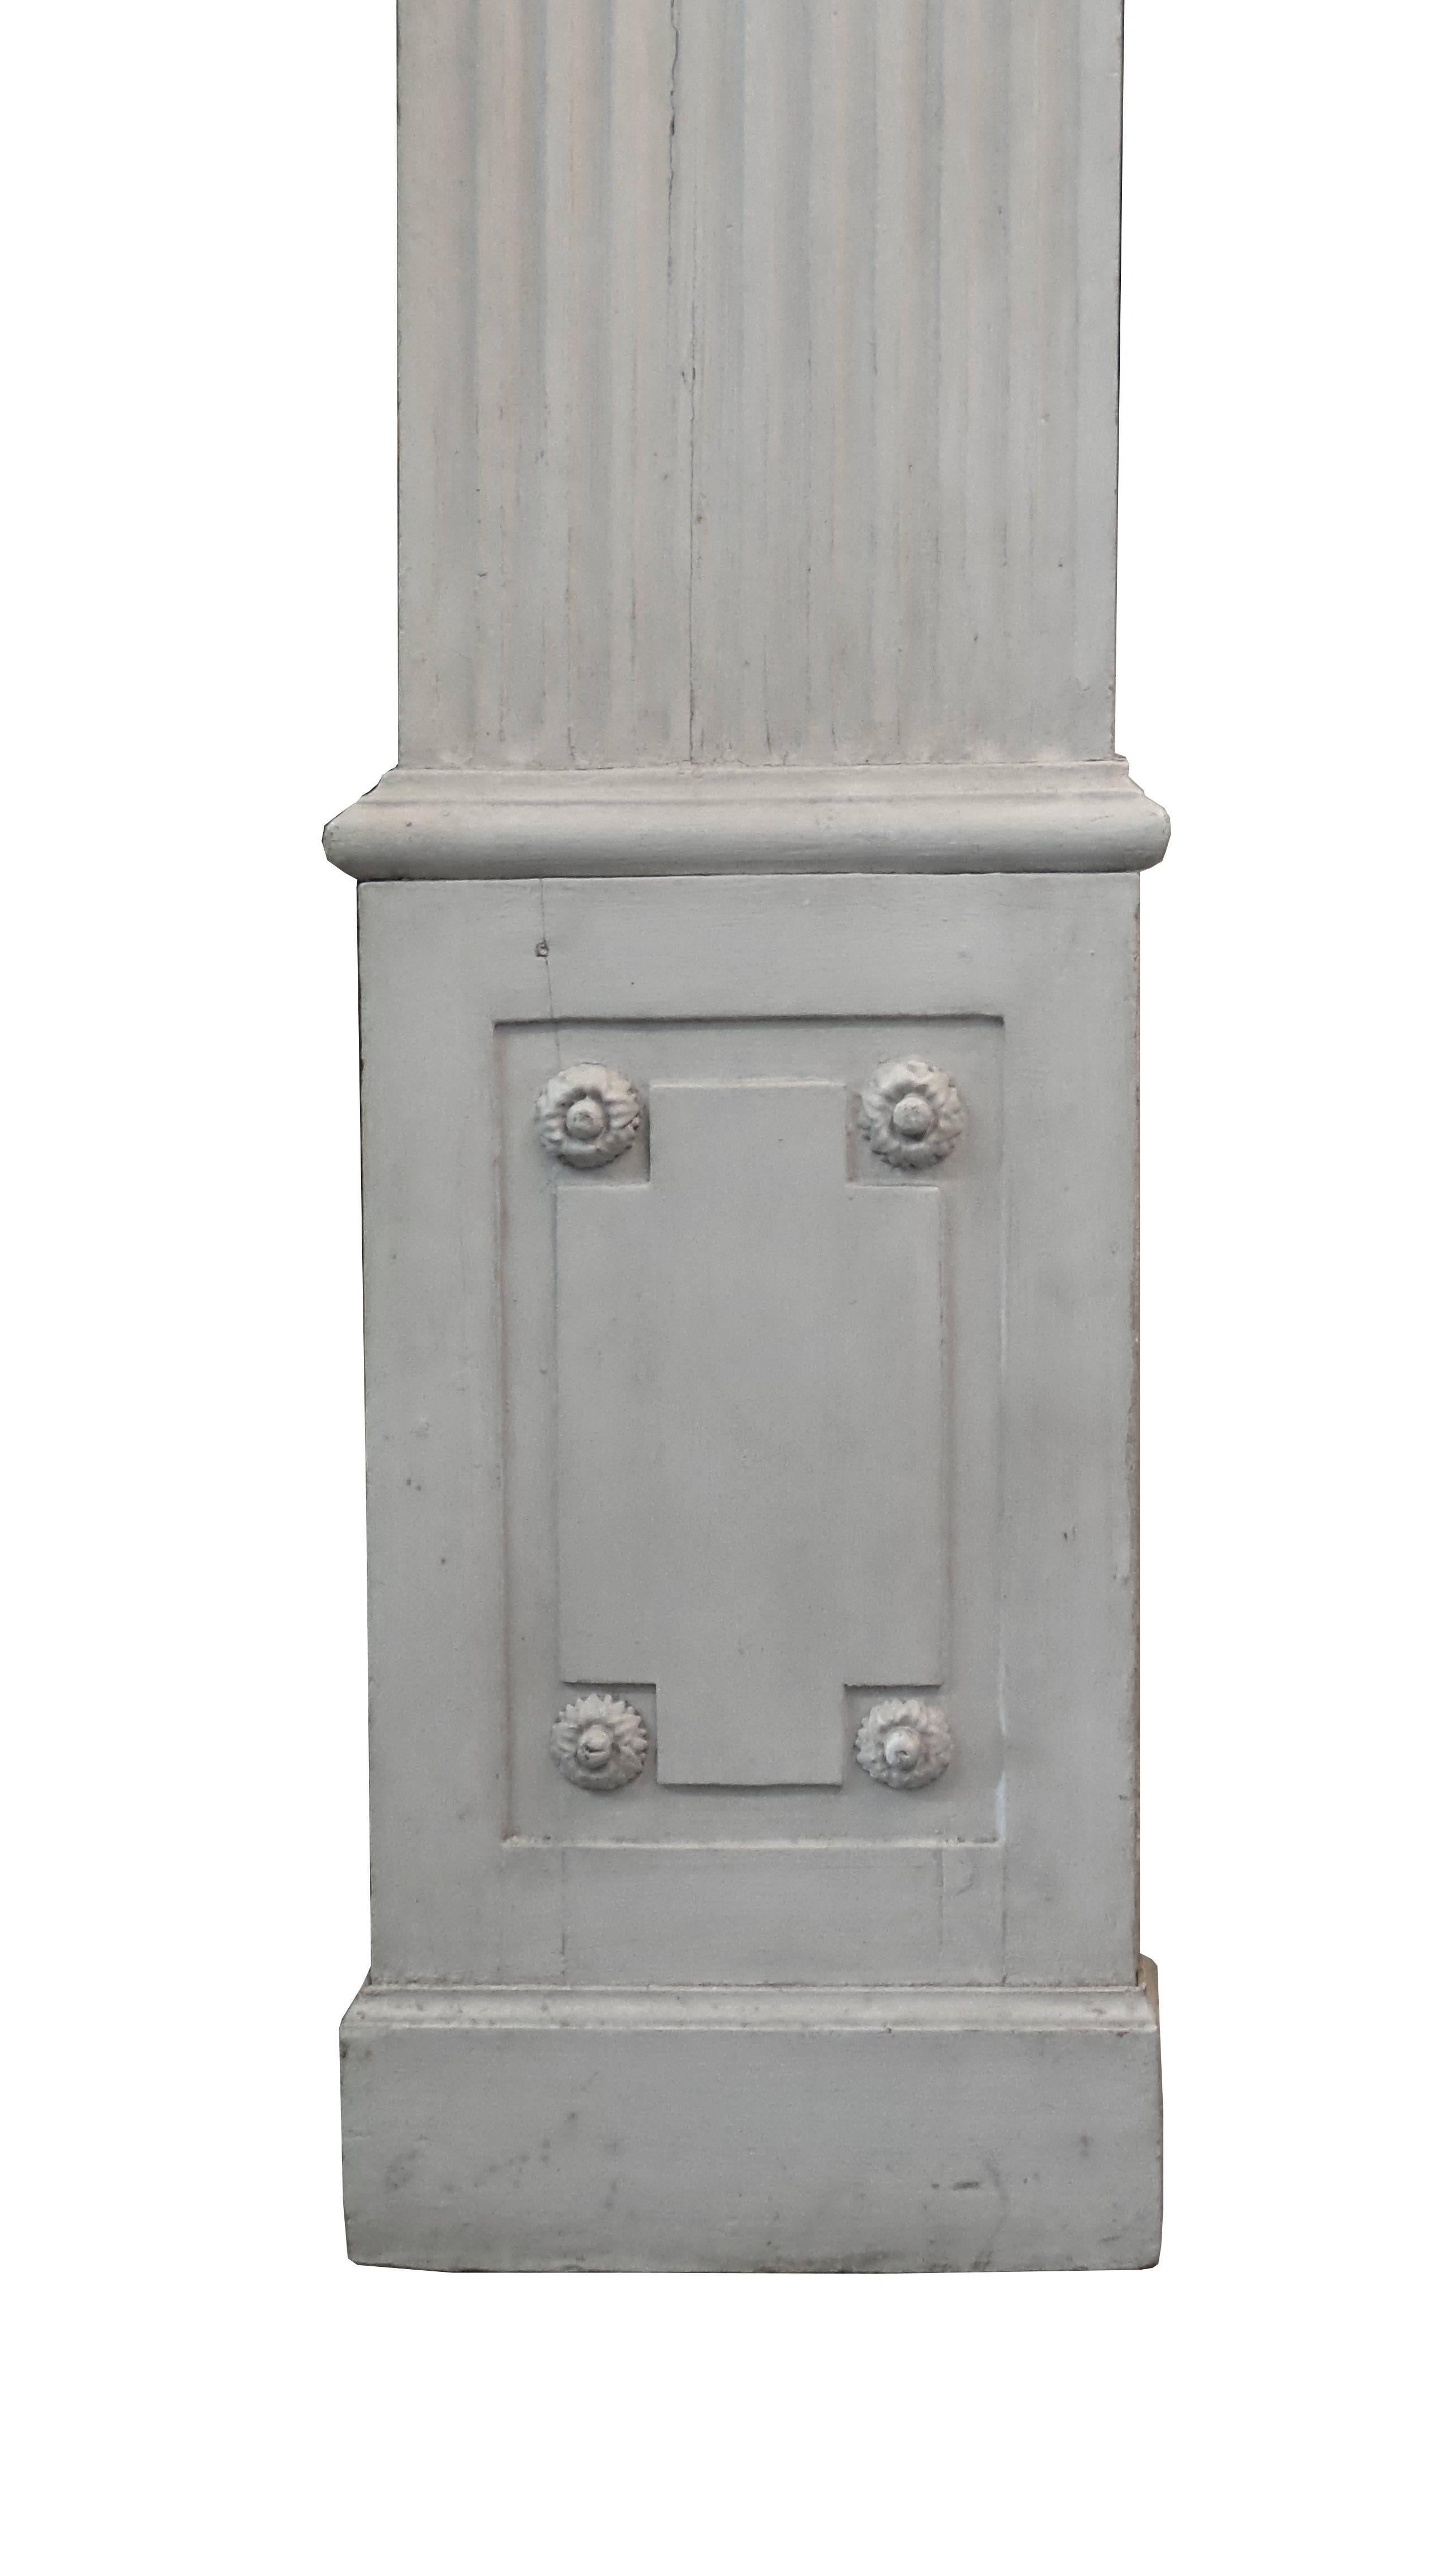 A set of six antique 19th century Louis XVI style fluted pilasters capped with Ionic capitals, lovely chalky grey-white finish, five of which measure 16" wide at the base and one narrower at 13" wide.